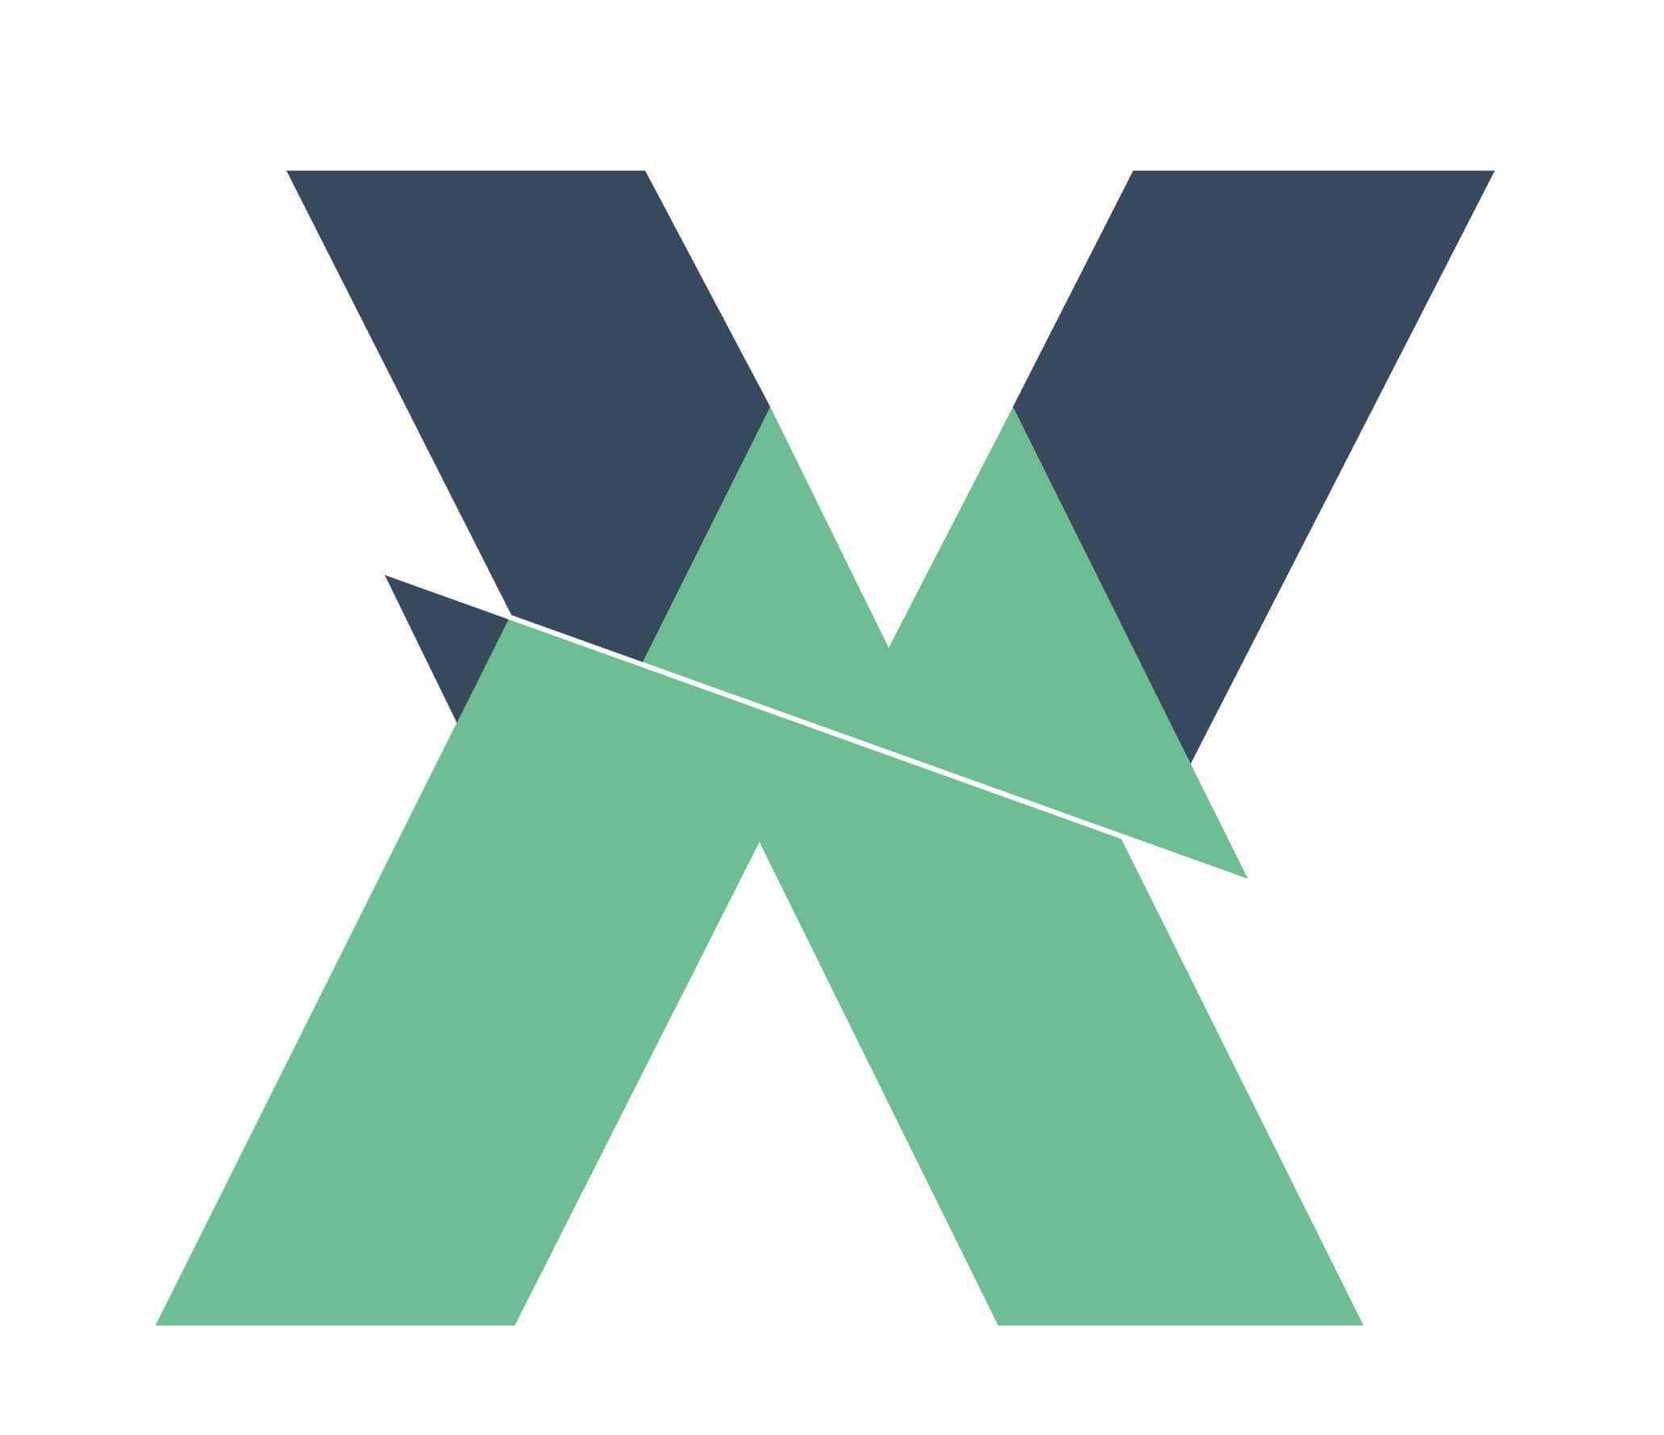 Vuex article illustration with a big X capital letter